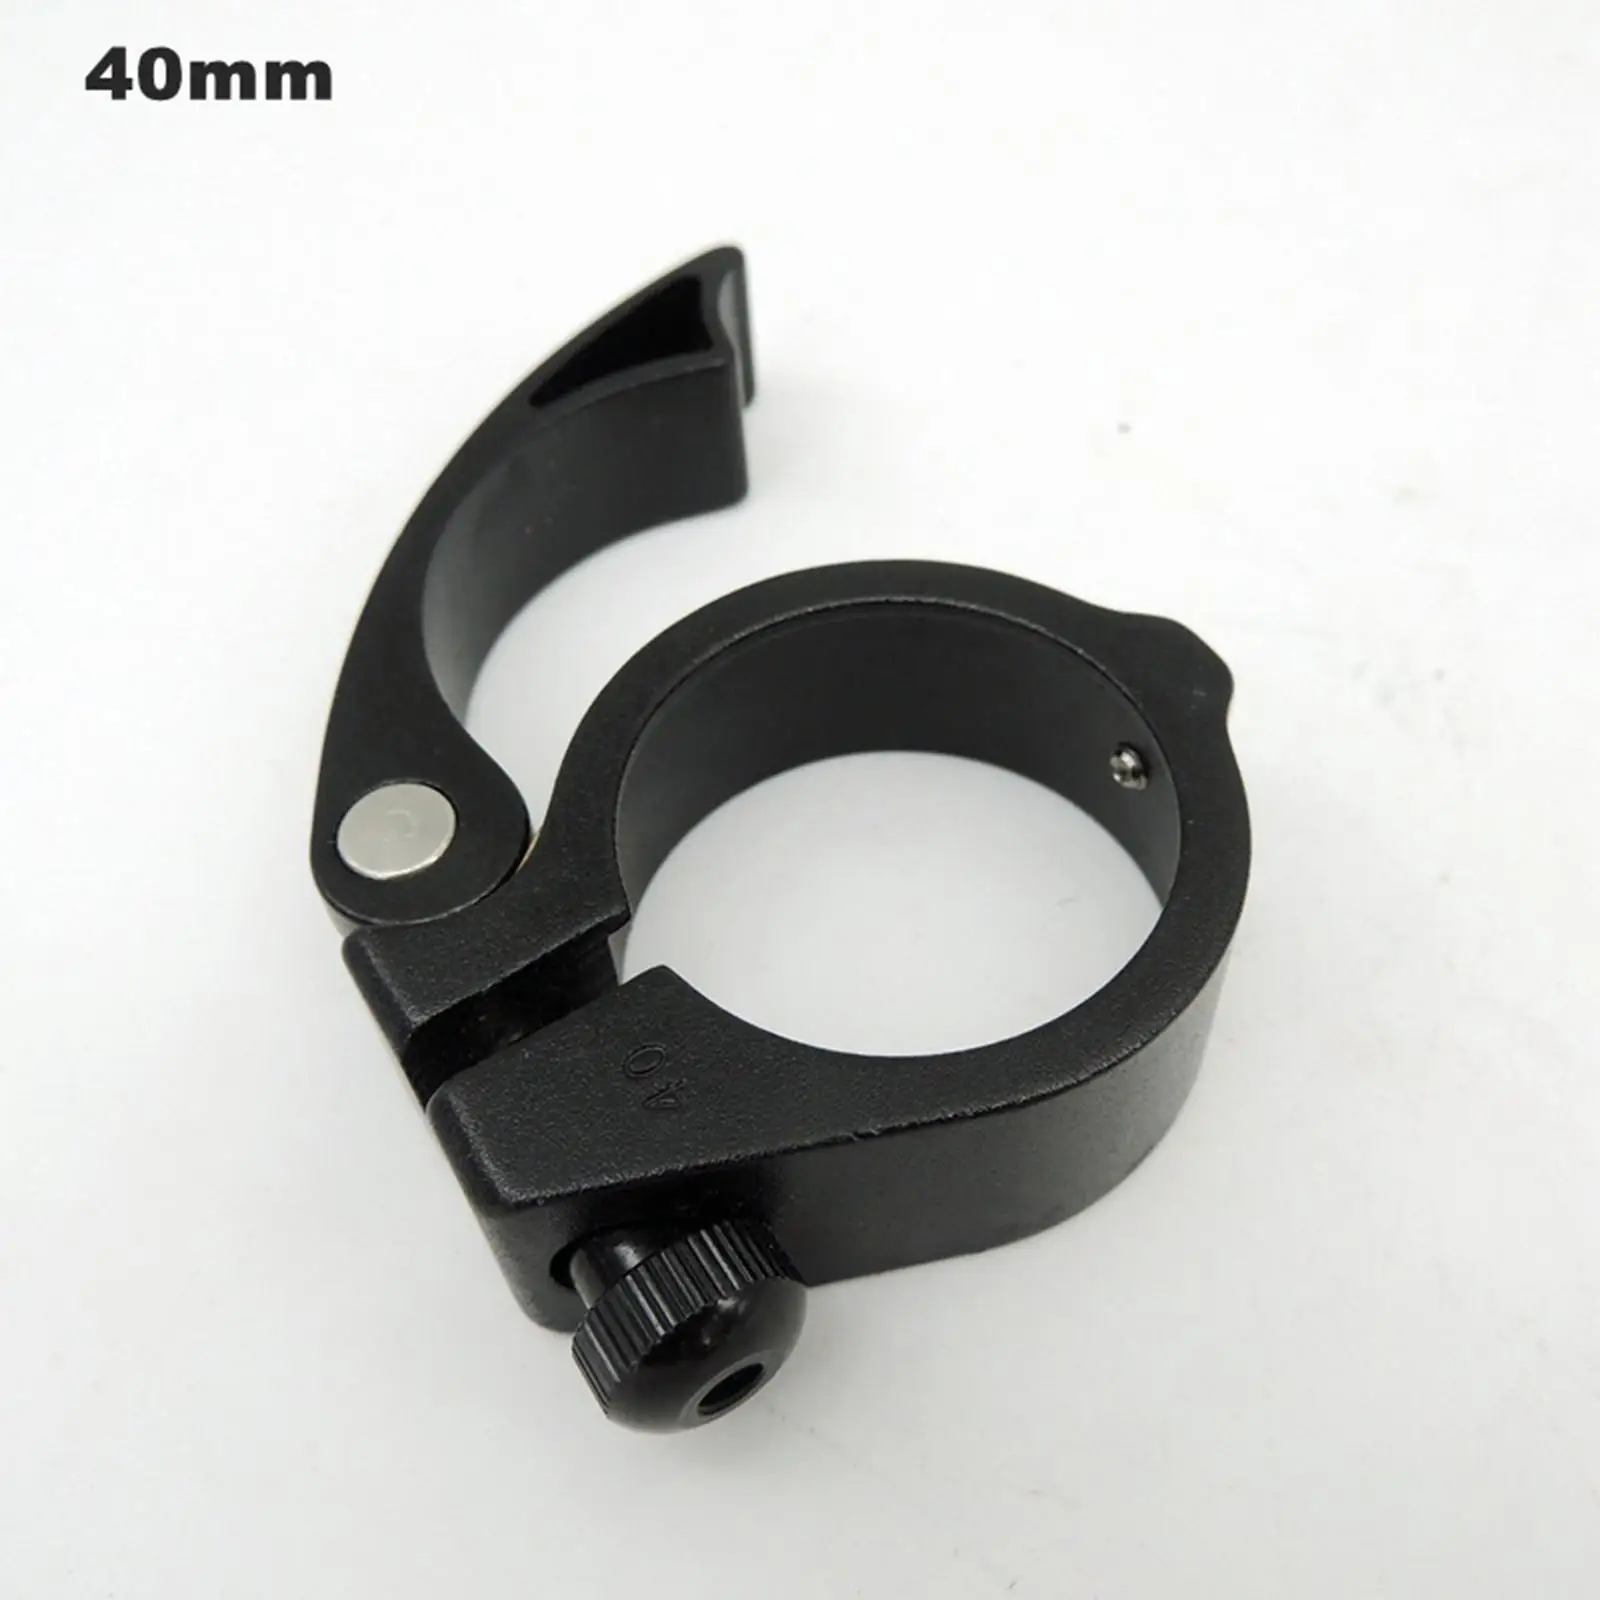 Bike Seat Post Clamp Bicycle Seatpost Clamp Seatpost Collar for Road Bicycle